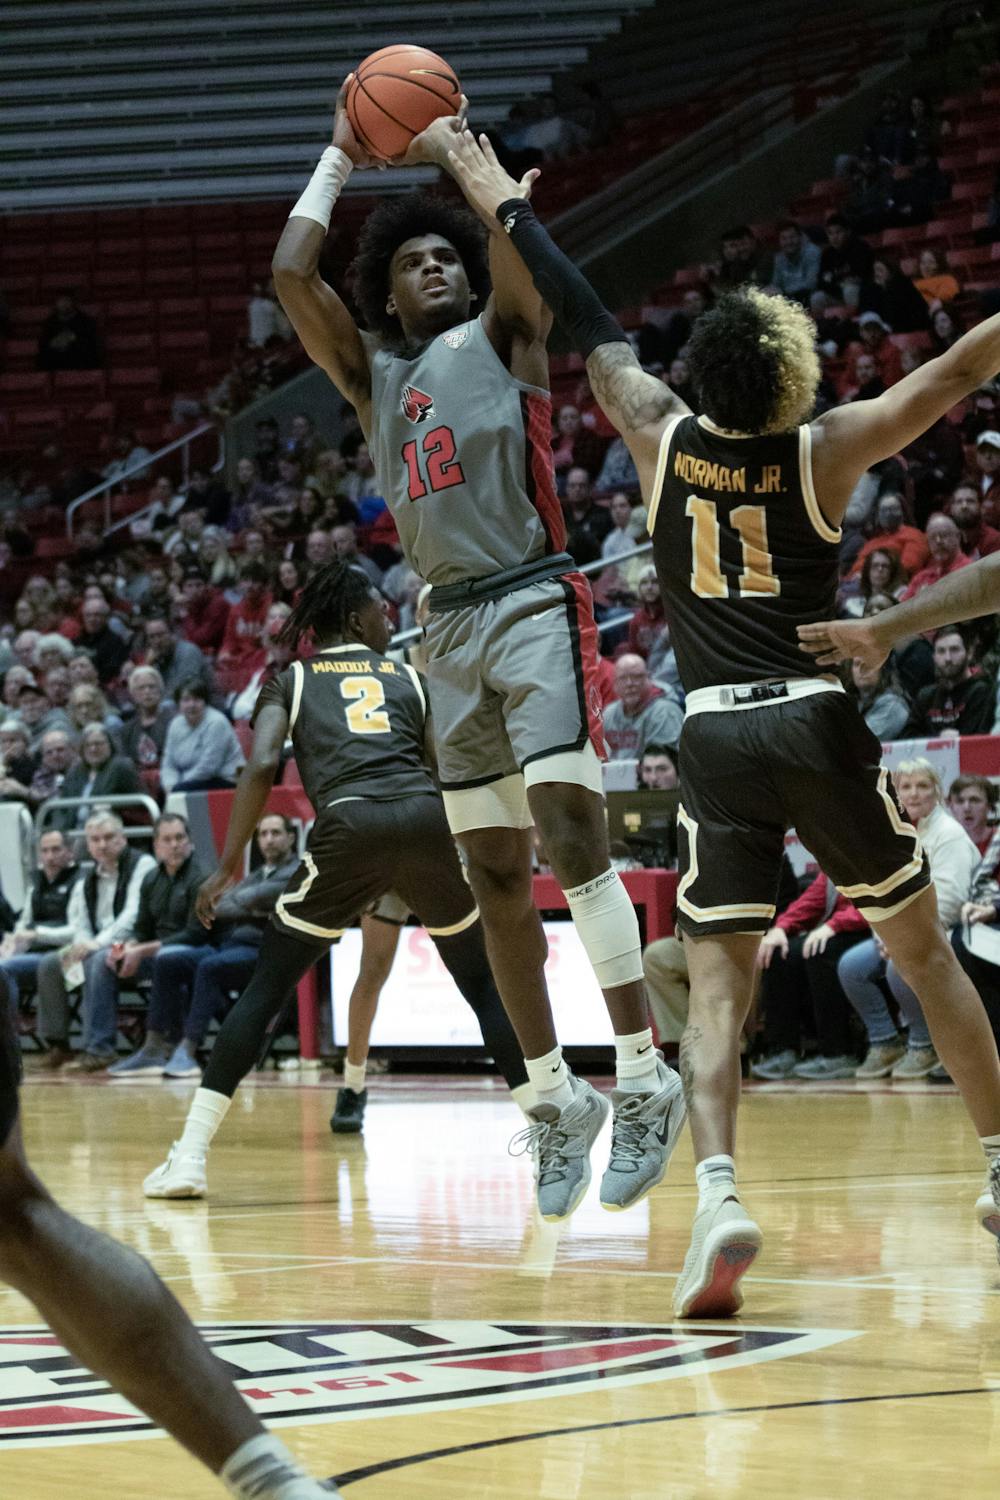 Takeaways from Ball State's 71-70 victory over Western Michigan